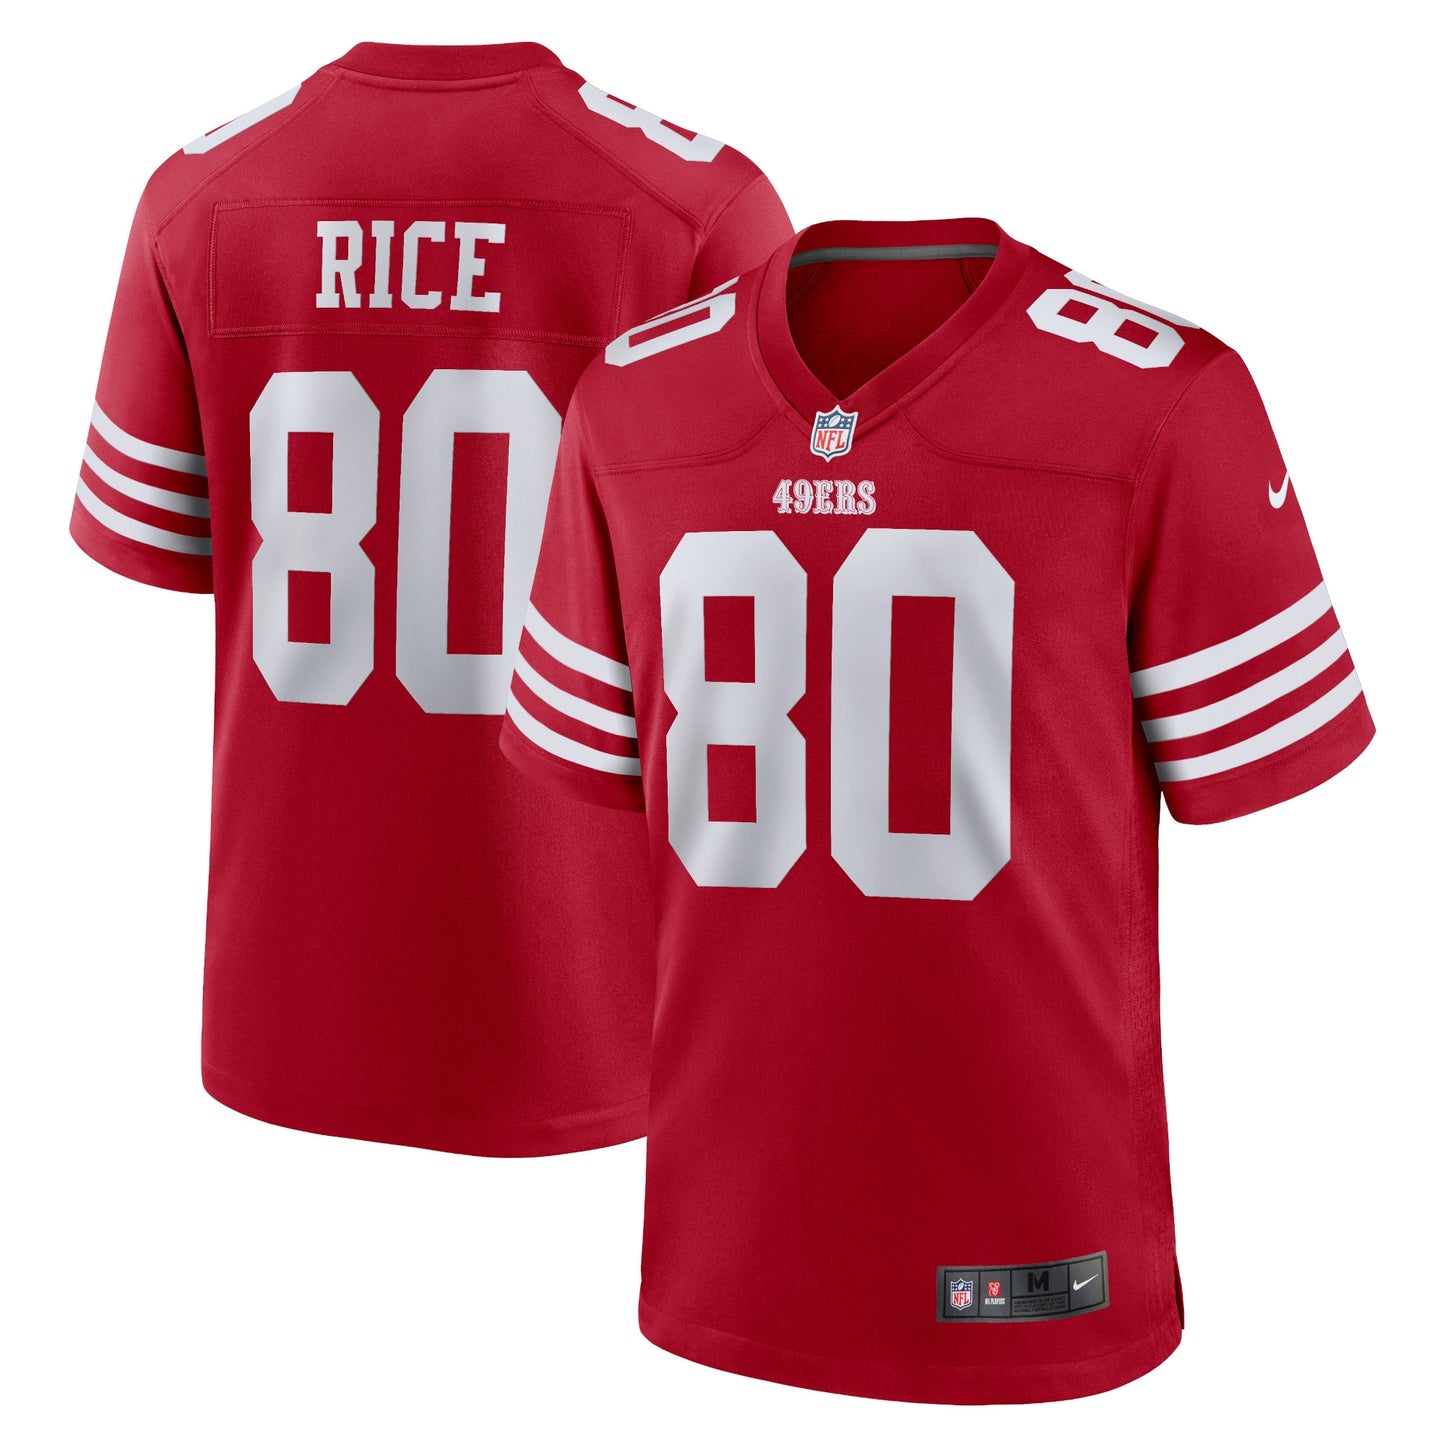 Jerry Rice San Francisco 49ers Nike Retired Team Player Game Jersey - Scarlet